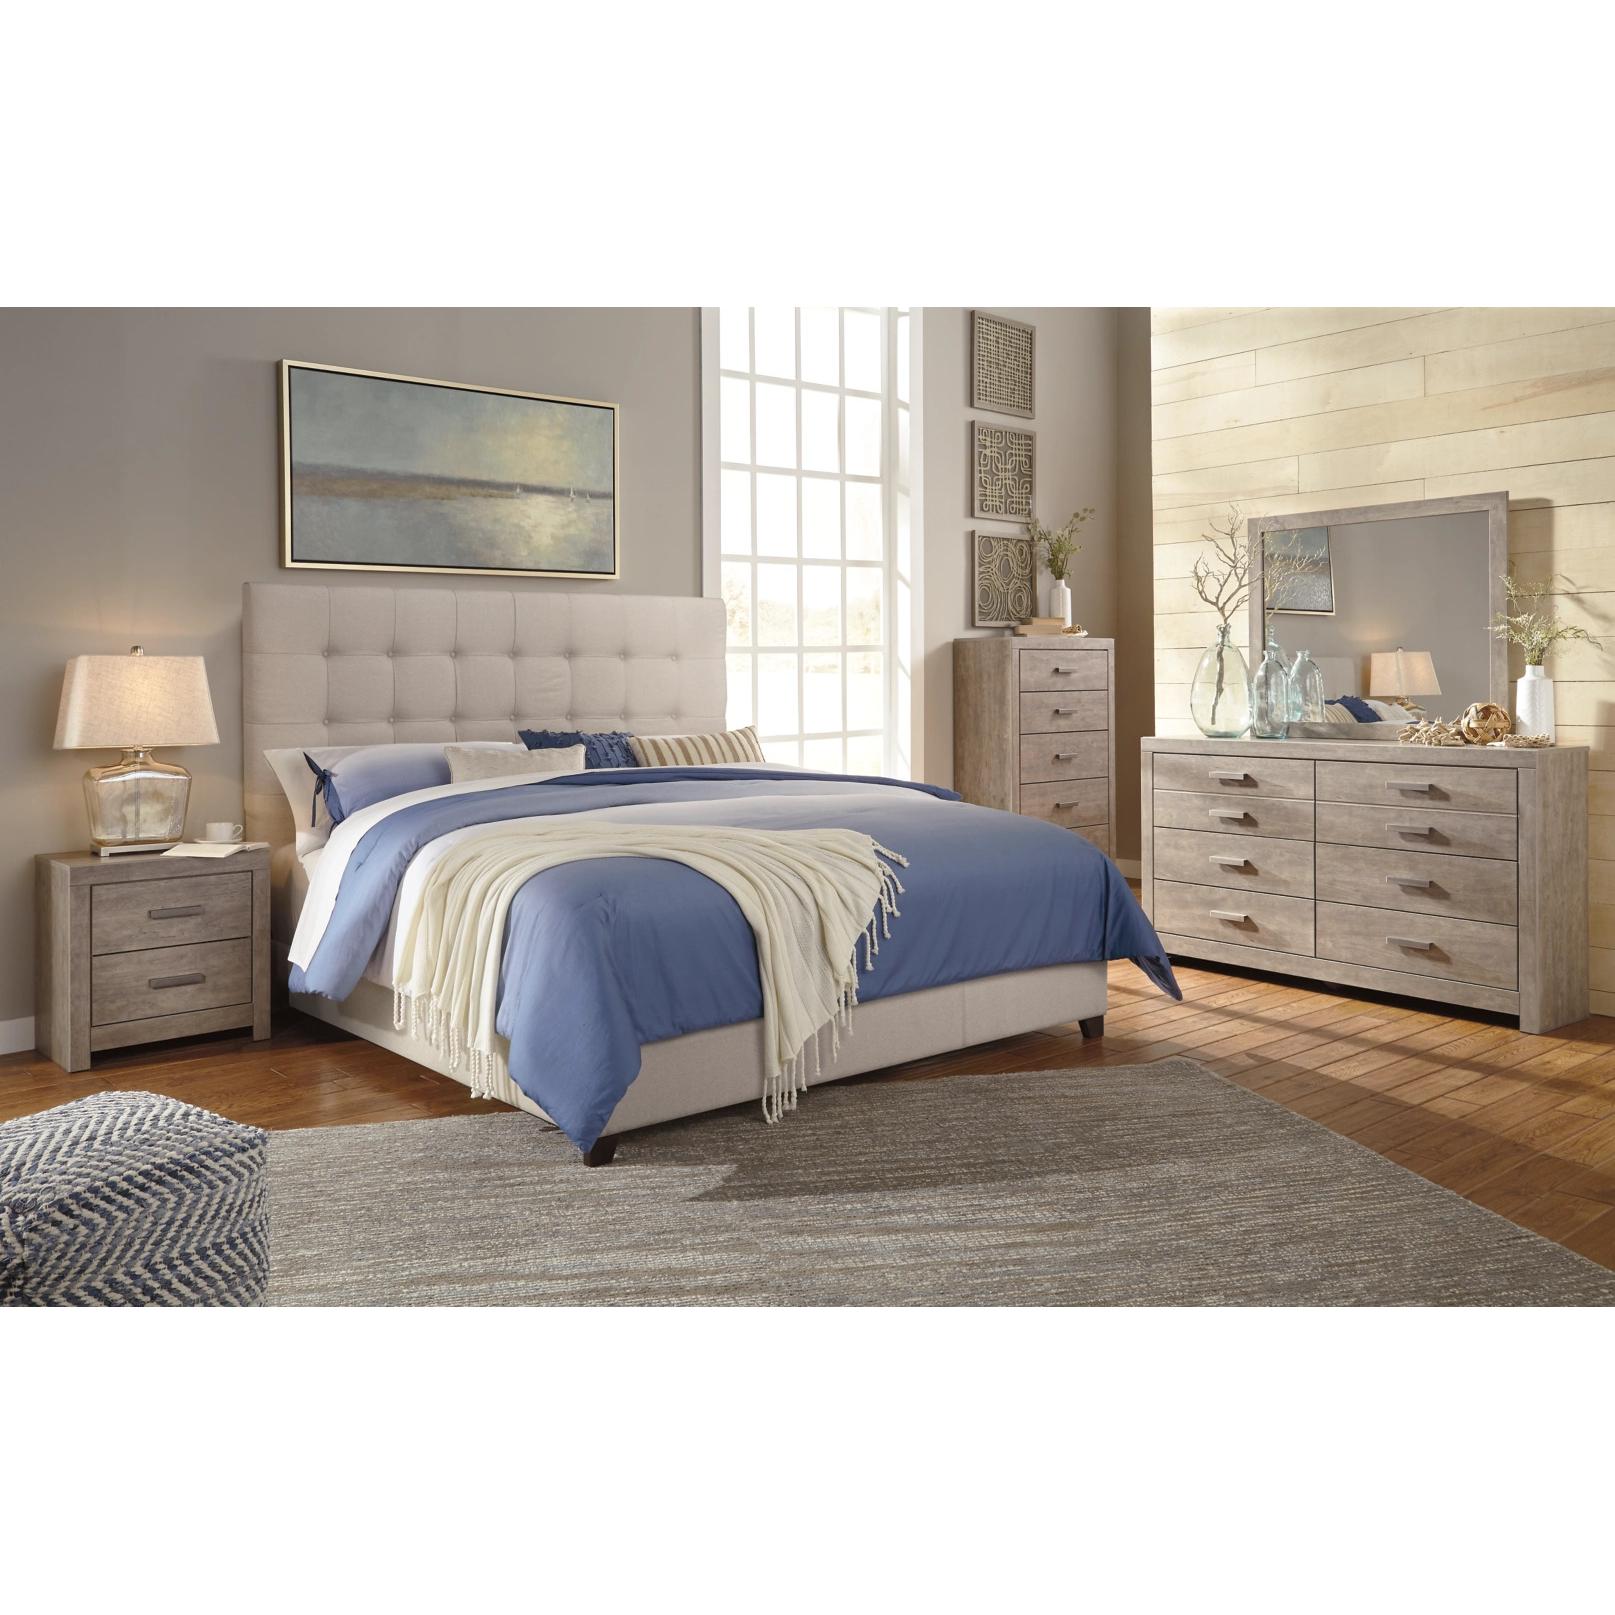 Signature Design by Ashley Dolante B130 5 pc Queen Upholstered Panel Bedroom Set IMAGE 1